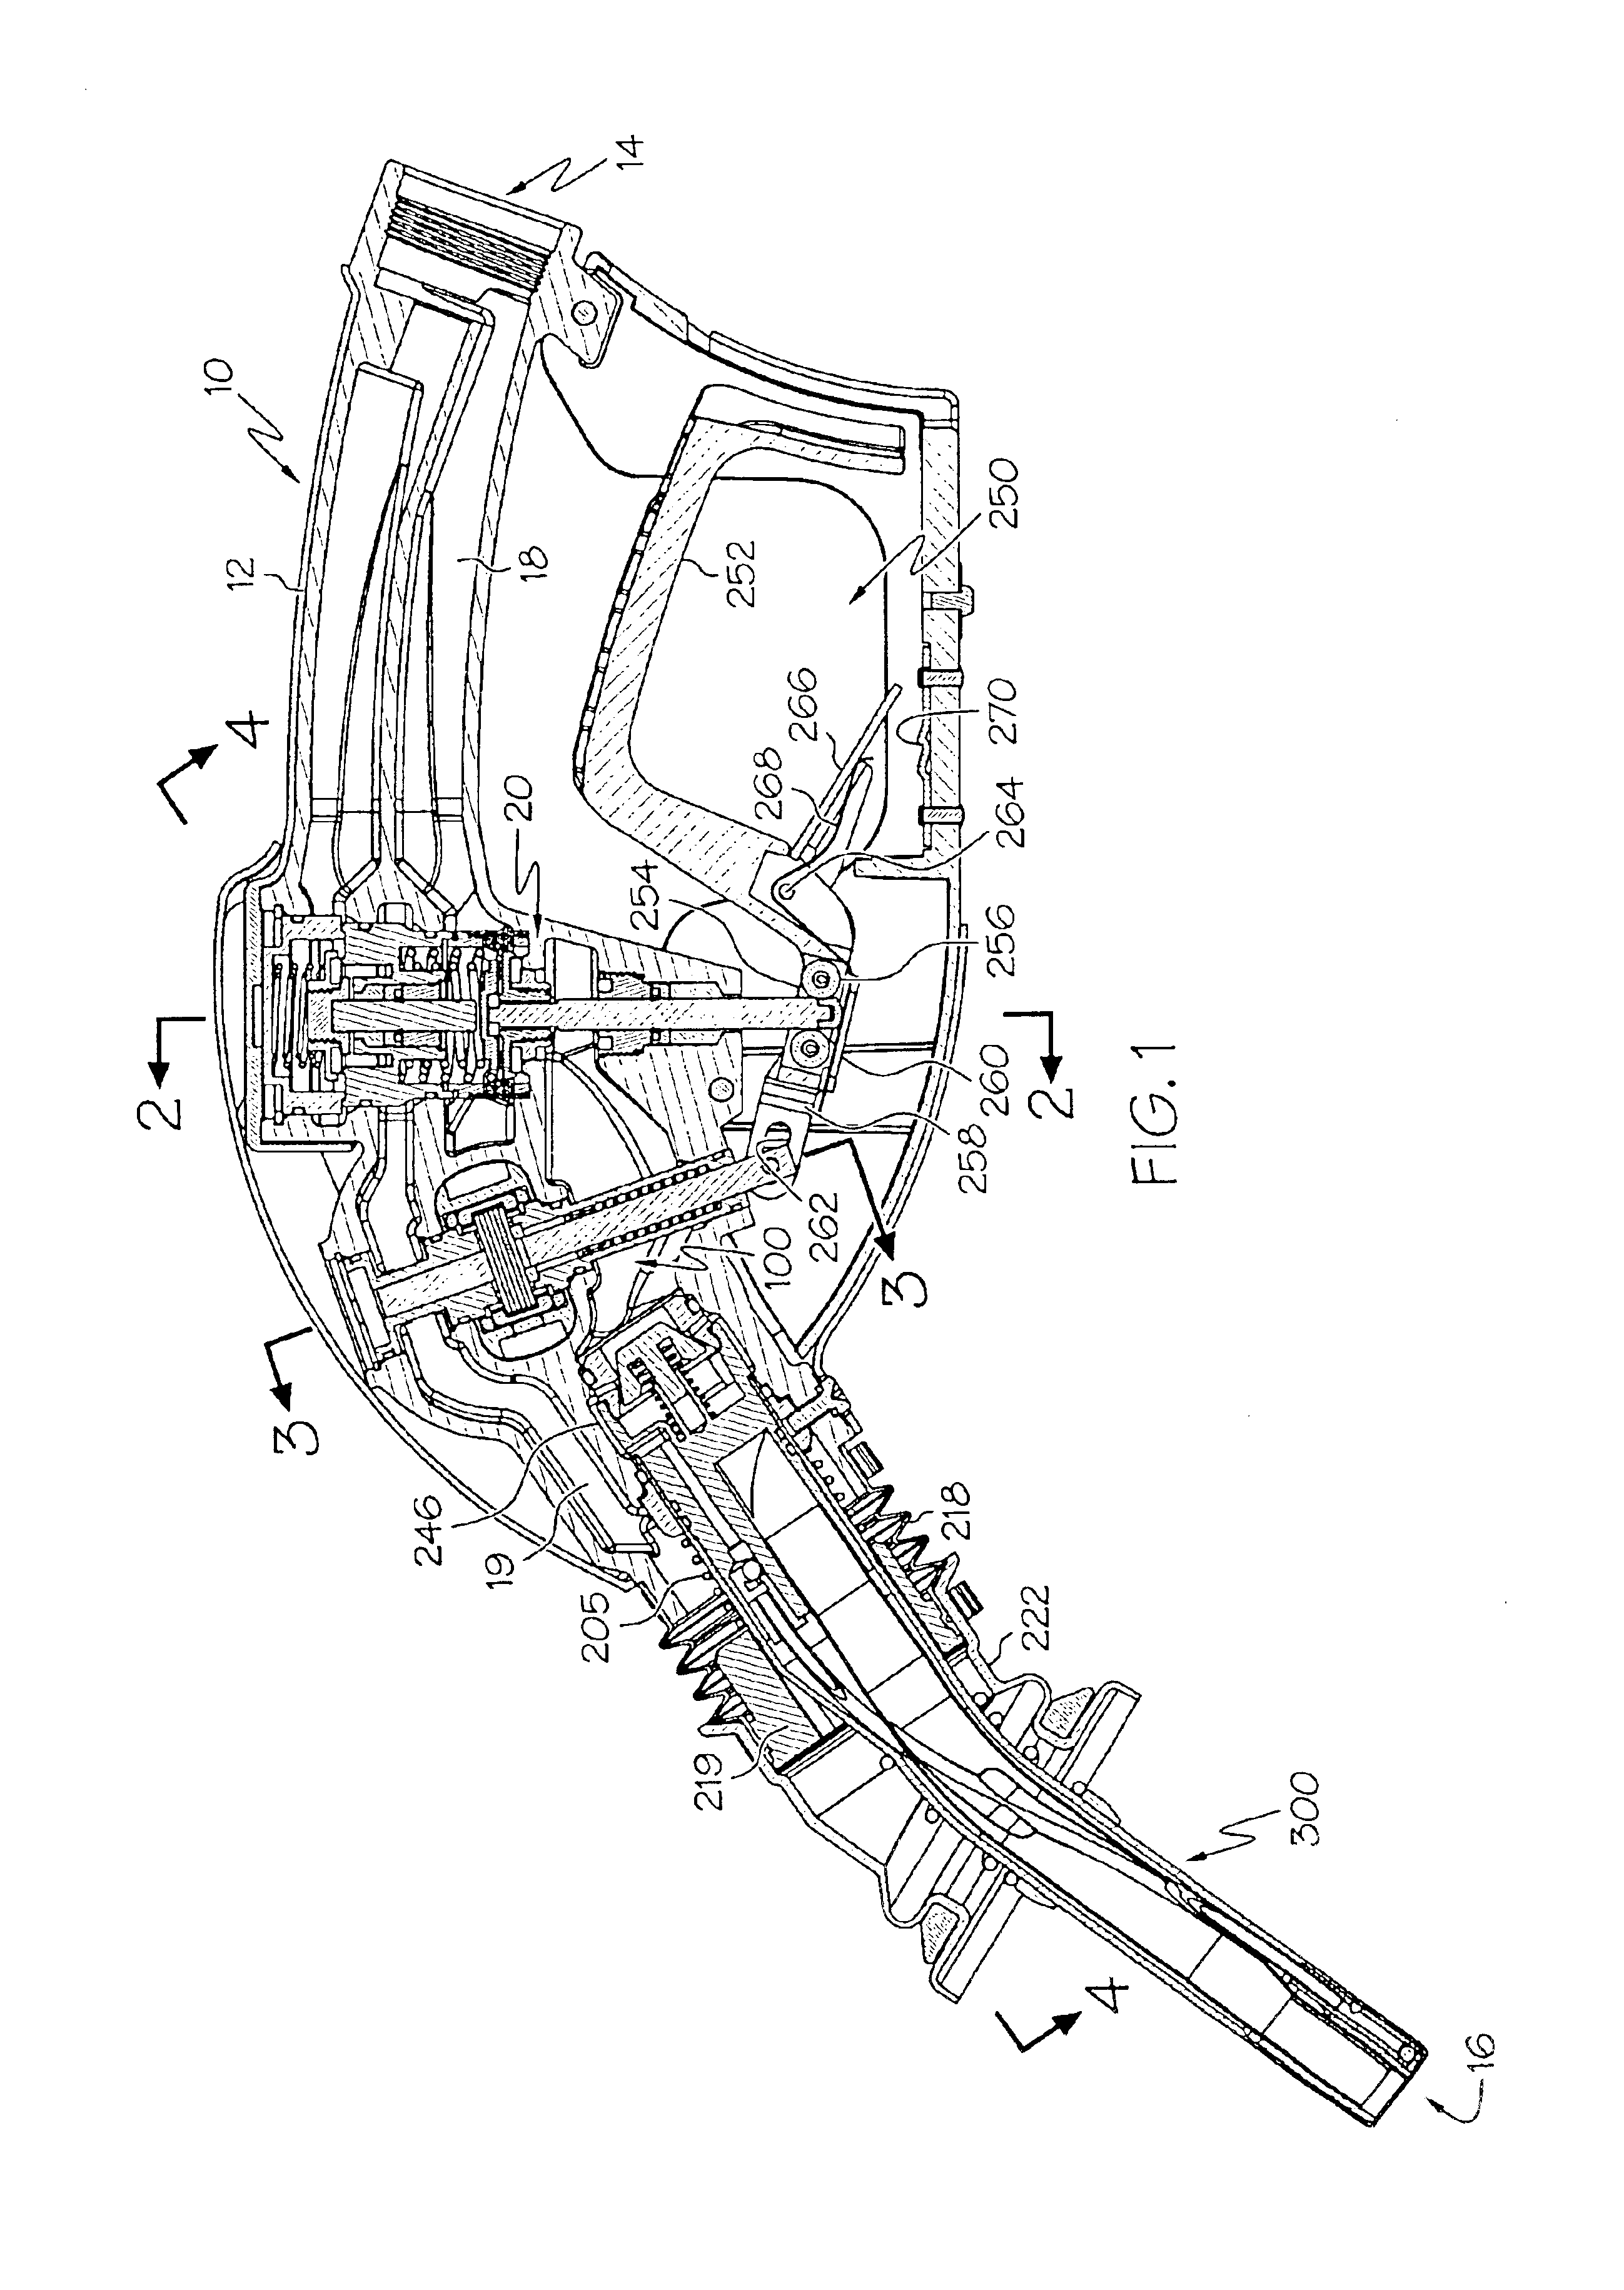 Nozzle including first and second lever portions